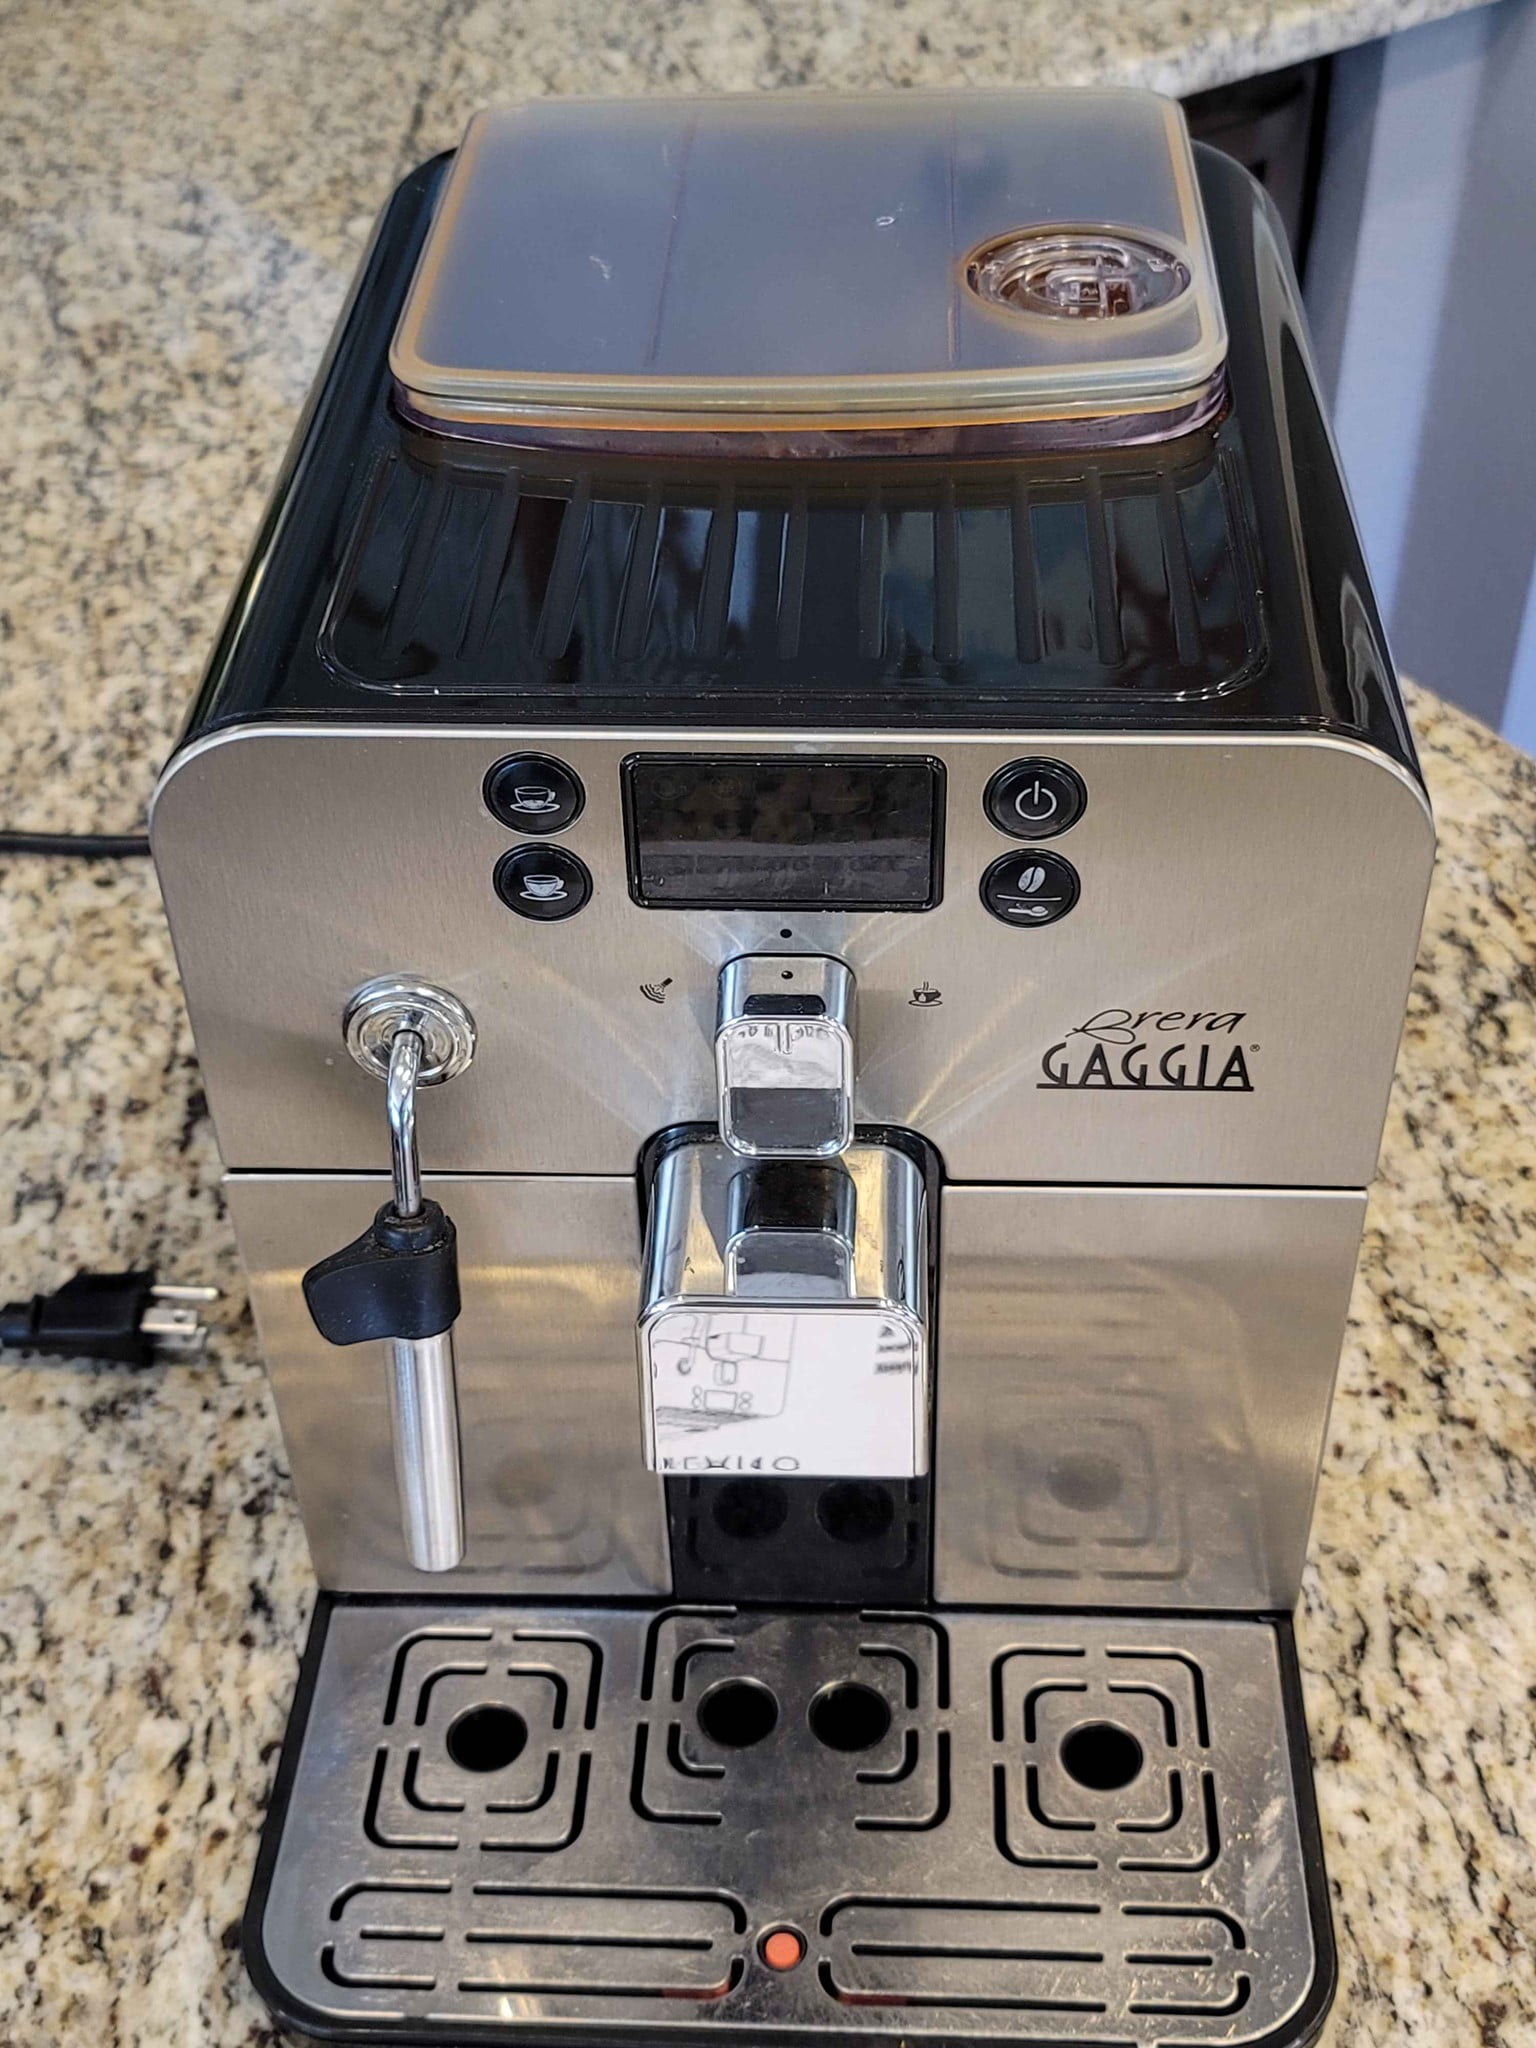 Gaggia Brera's grinder comes with an Adapting System 